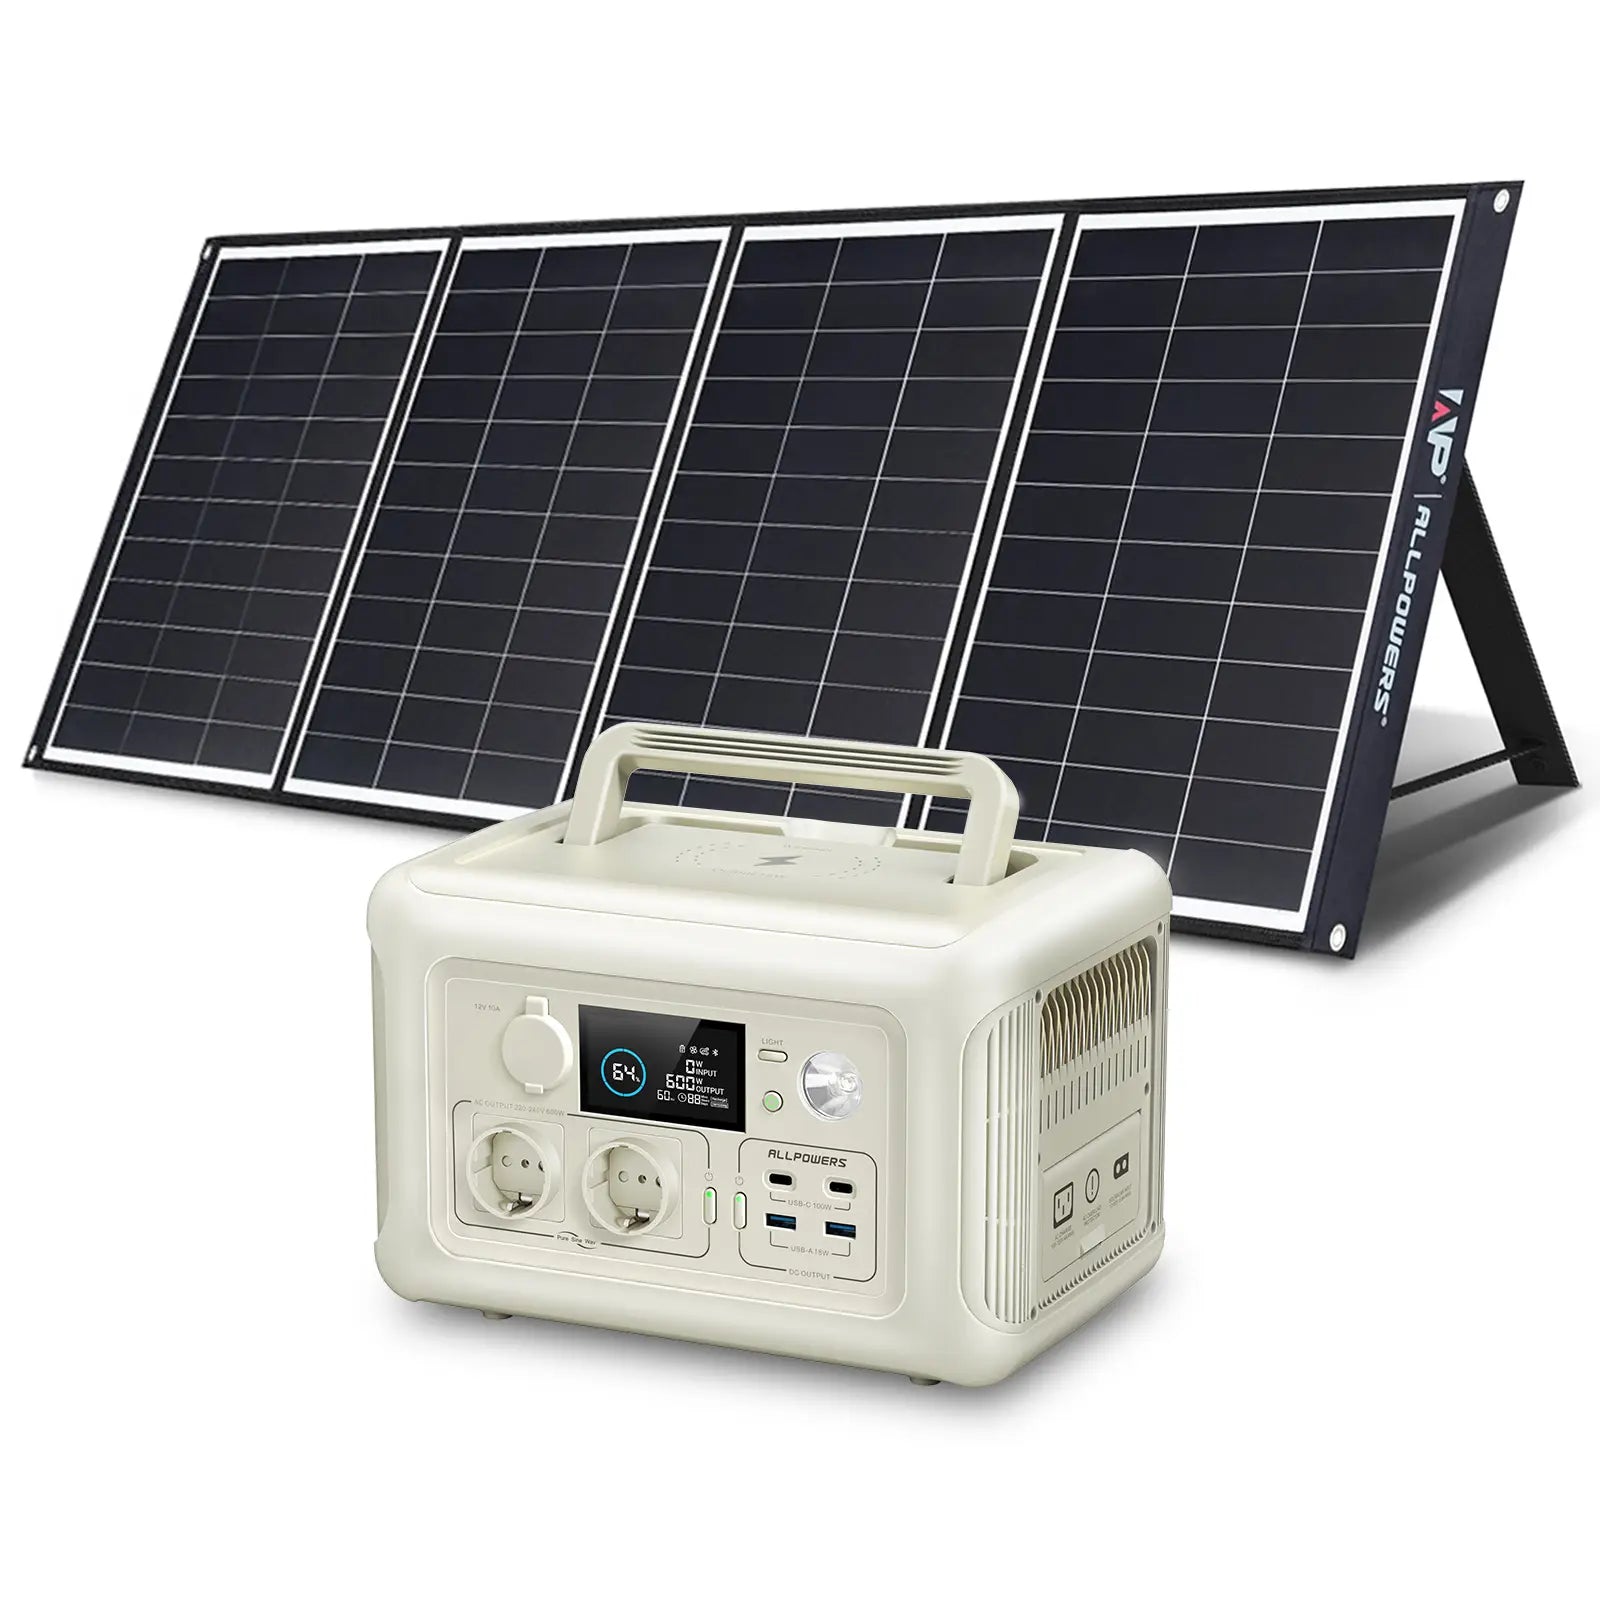 ALLPOWERS R600 Beige Solar Generator 600W Portable Power Station 299Wh with SP035 200W Solar Panel